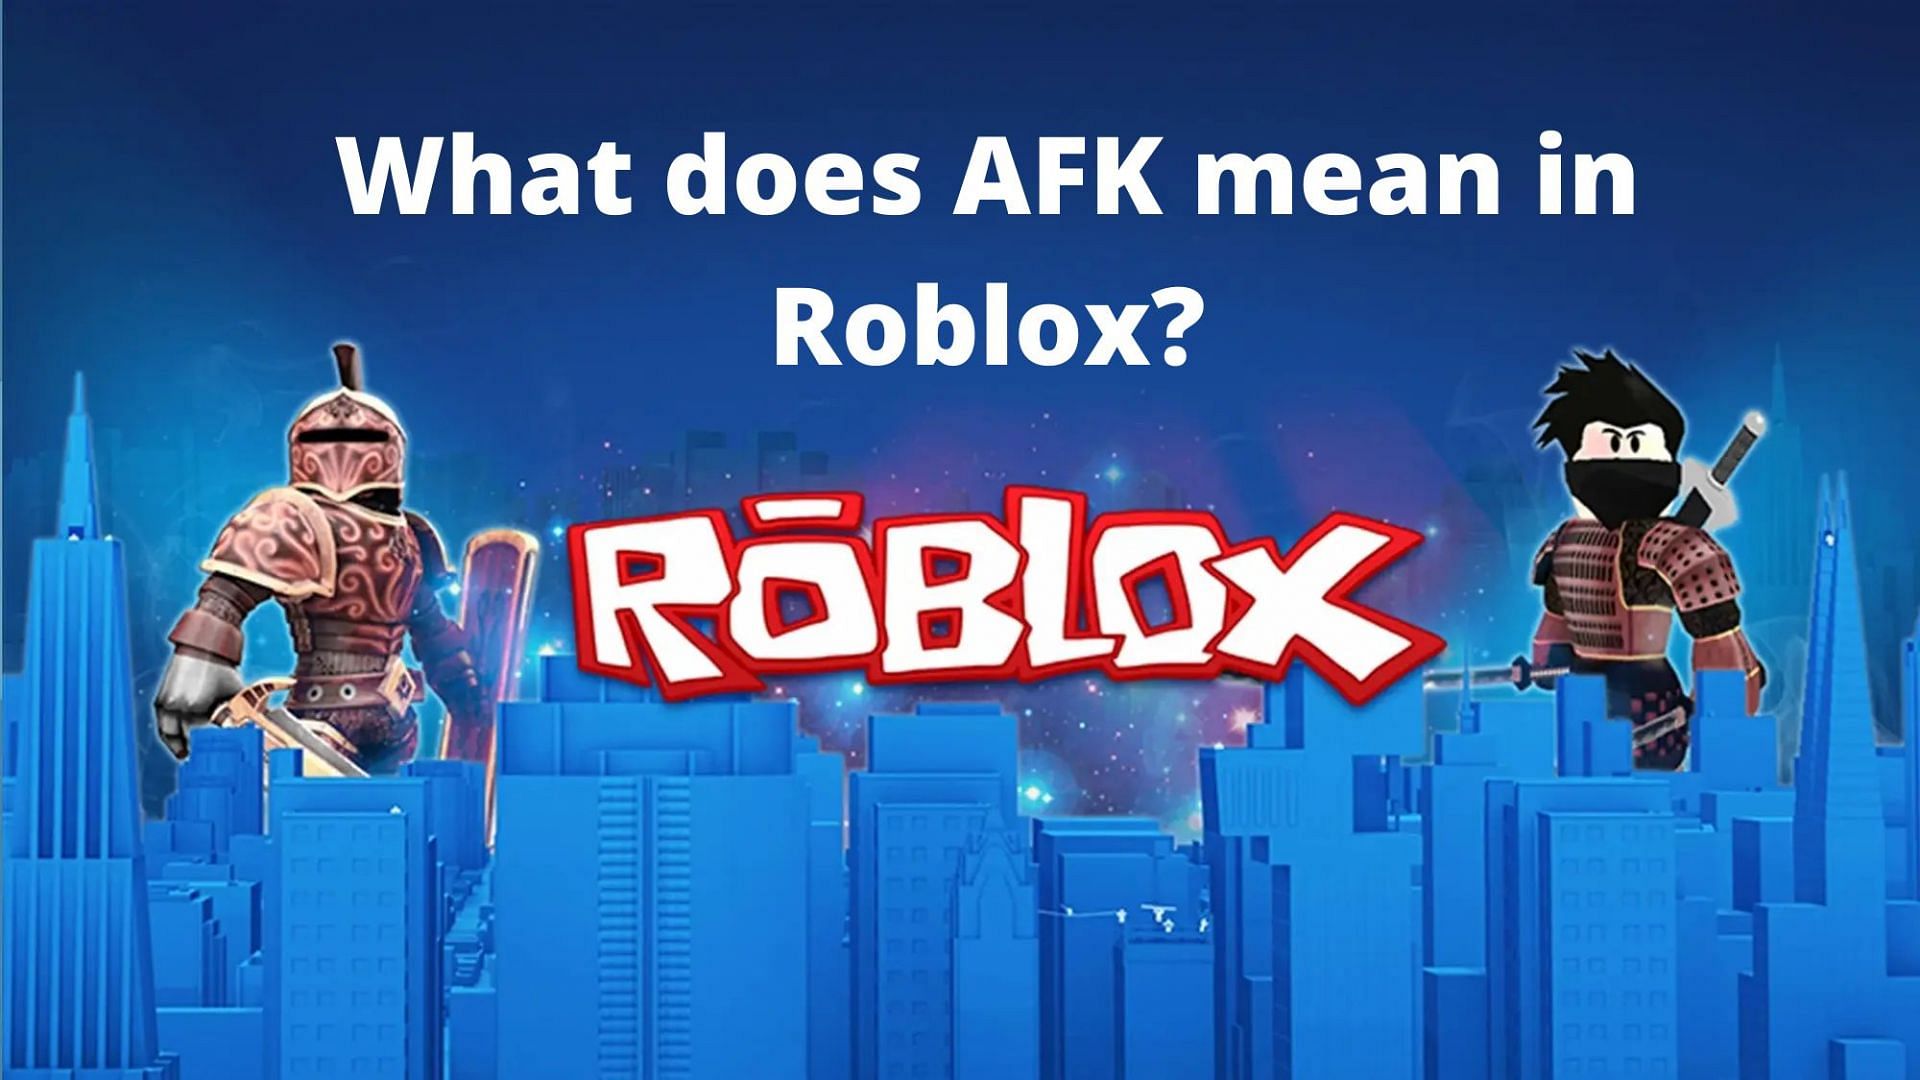 When is AFK used in Roblox? (Image via Roblox)